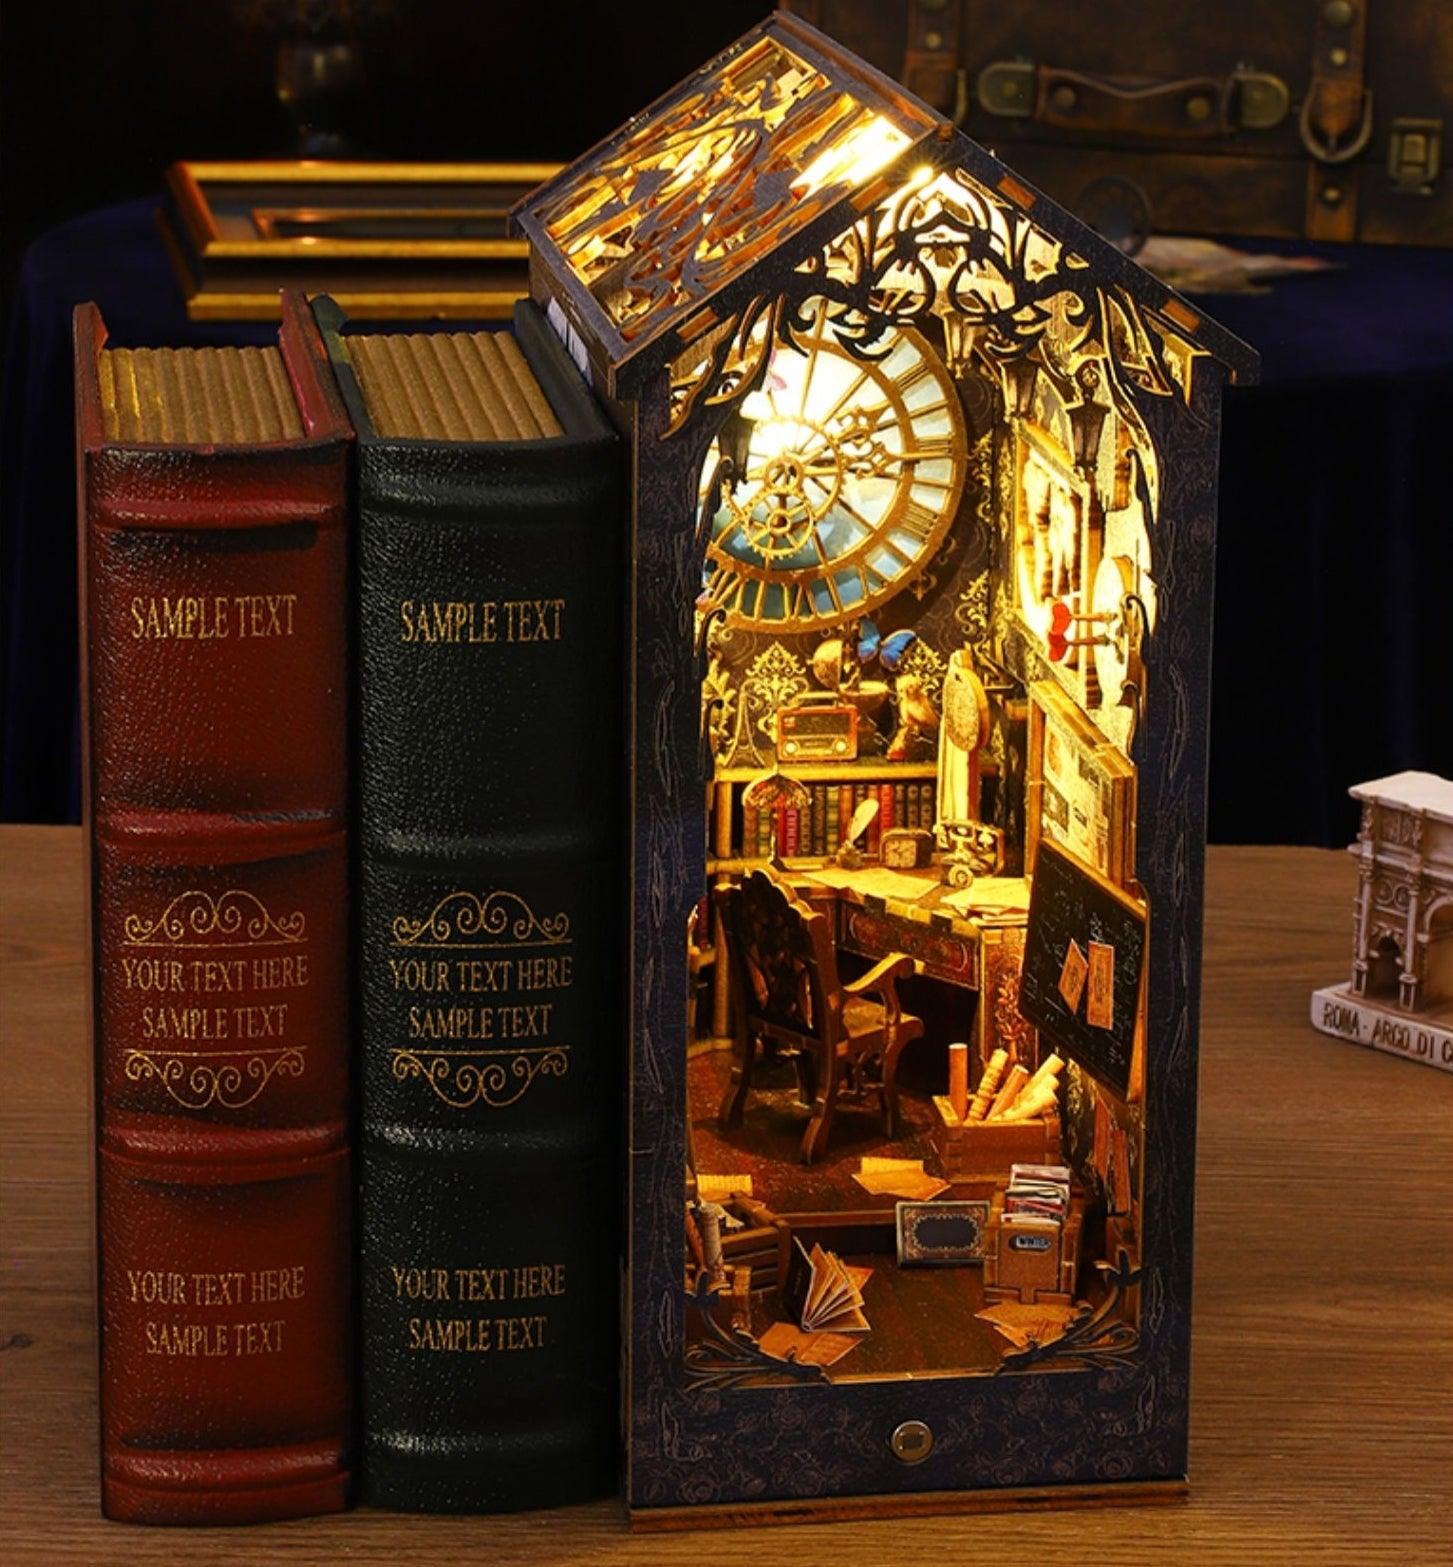 famous detective agency diy book nook kit, inspired by the famous detective Sherlock Holmes, A charming miniature 3d wooden puzzles bring the mysteries of Victorian London to life in authentic miniature scenes, perfect for bookshelf decor, and dollhouse collectors, or a gift for Sherlock Holmes fans. - front